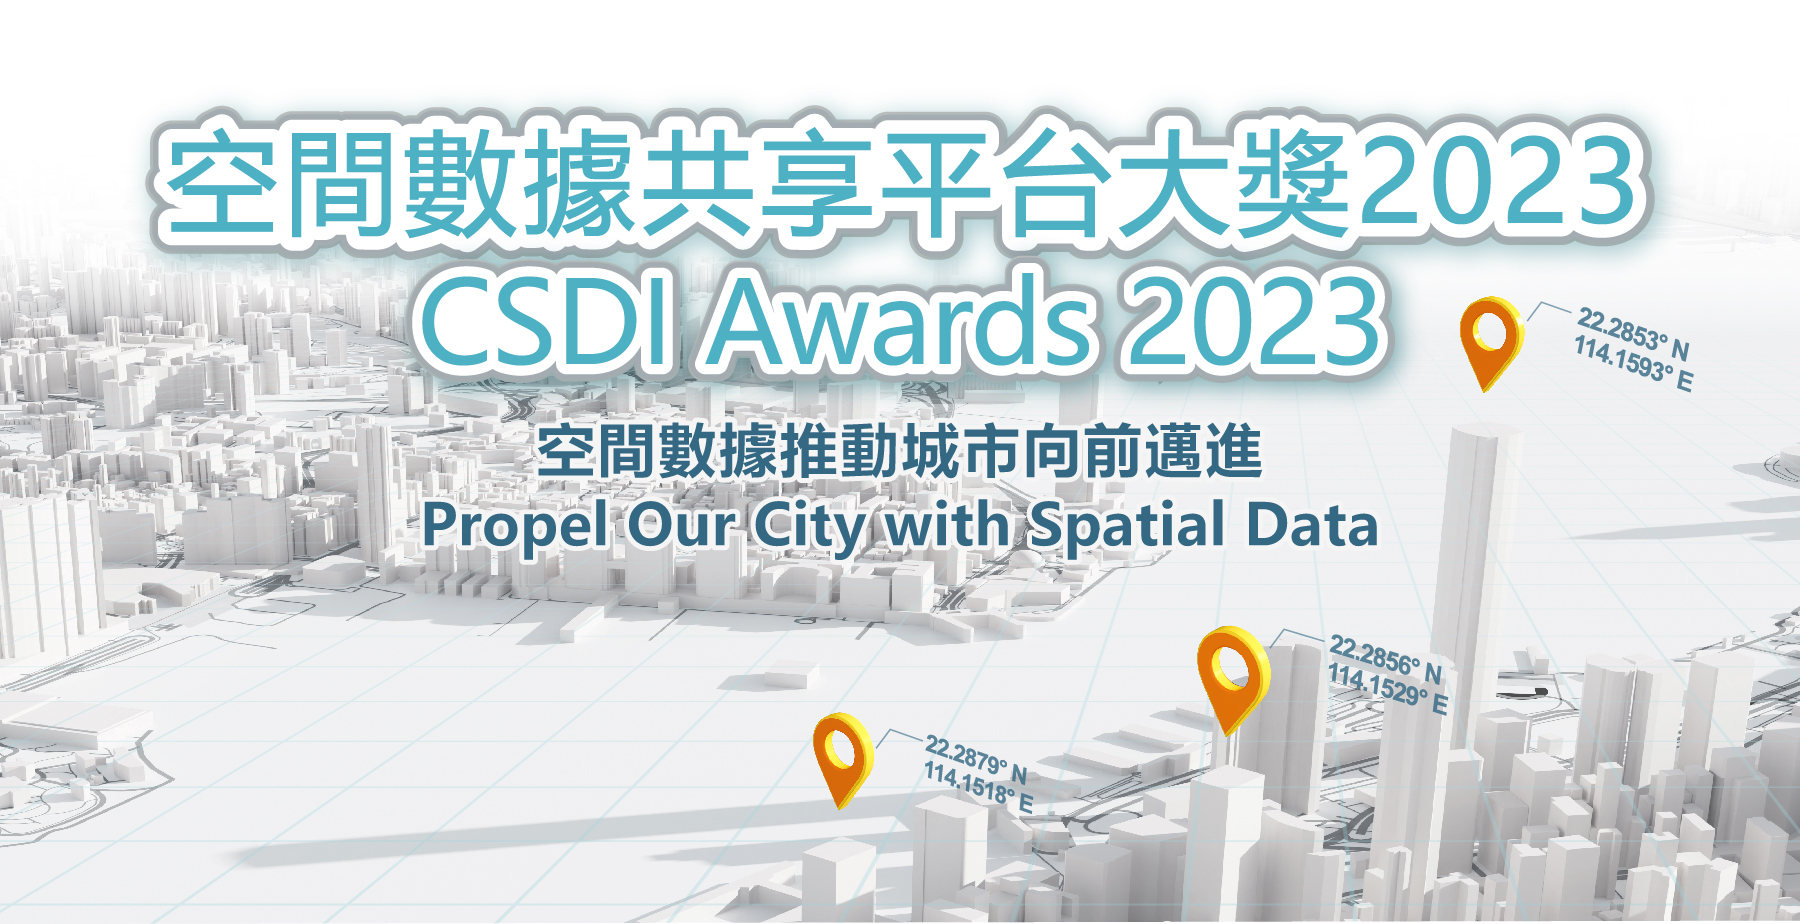 CSDI Awards 2023 “Propel Our City with Spatial Data”